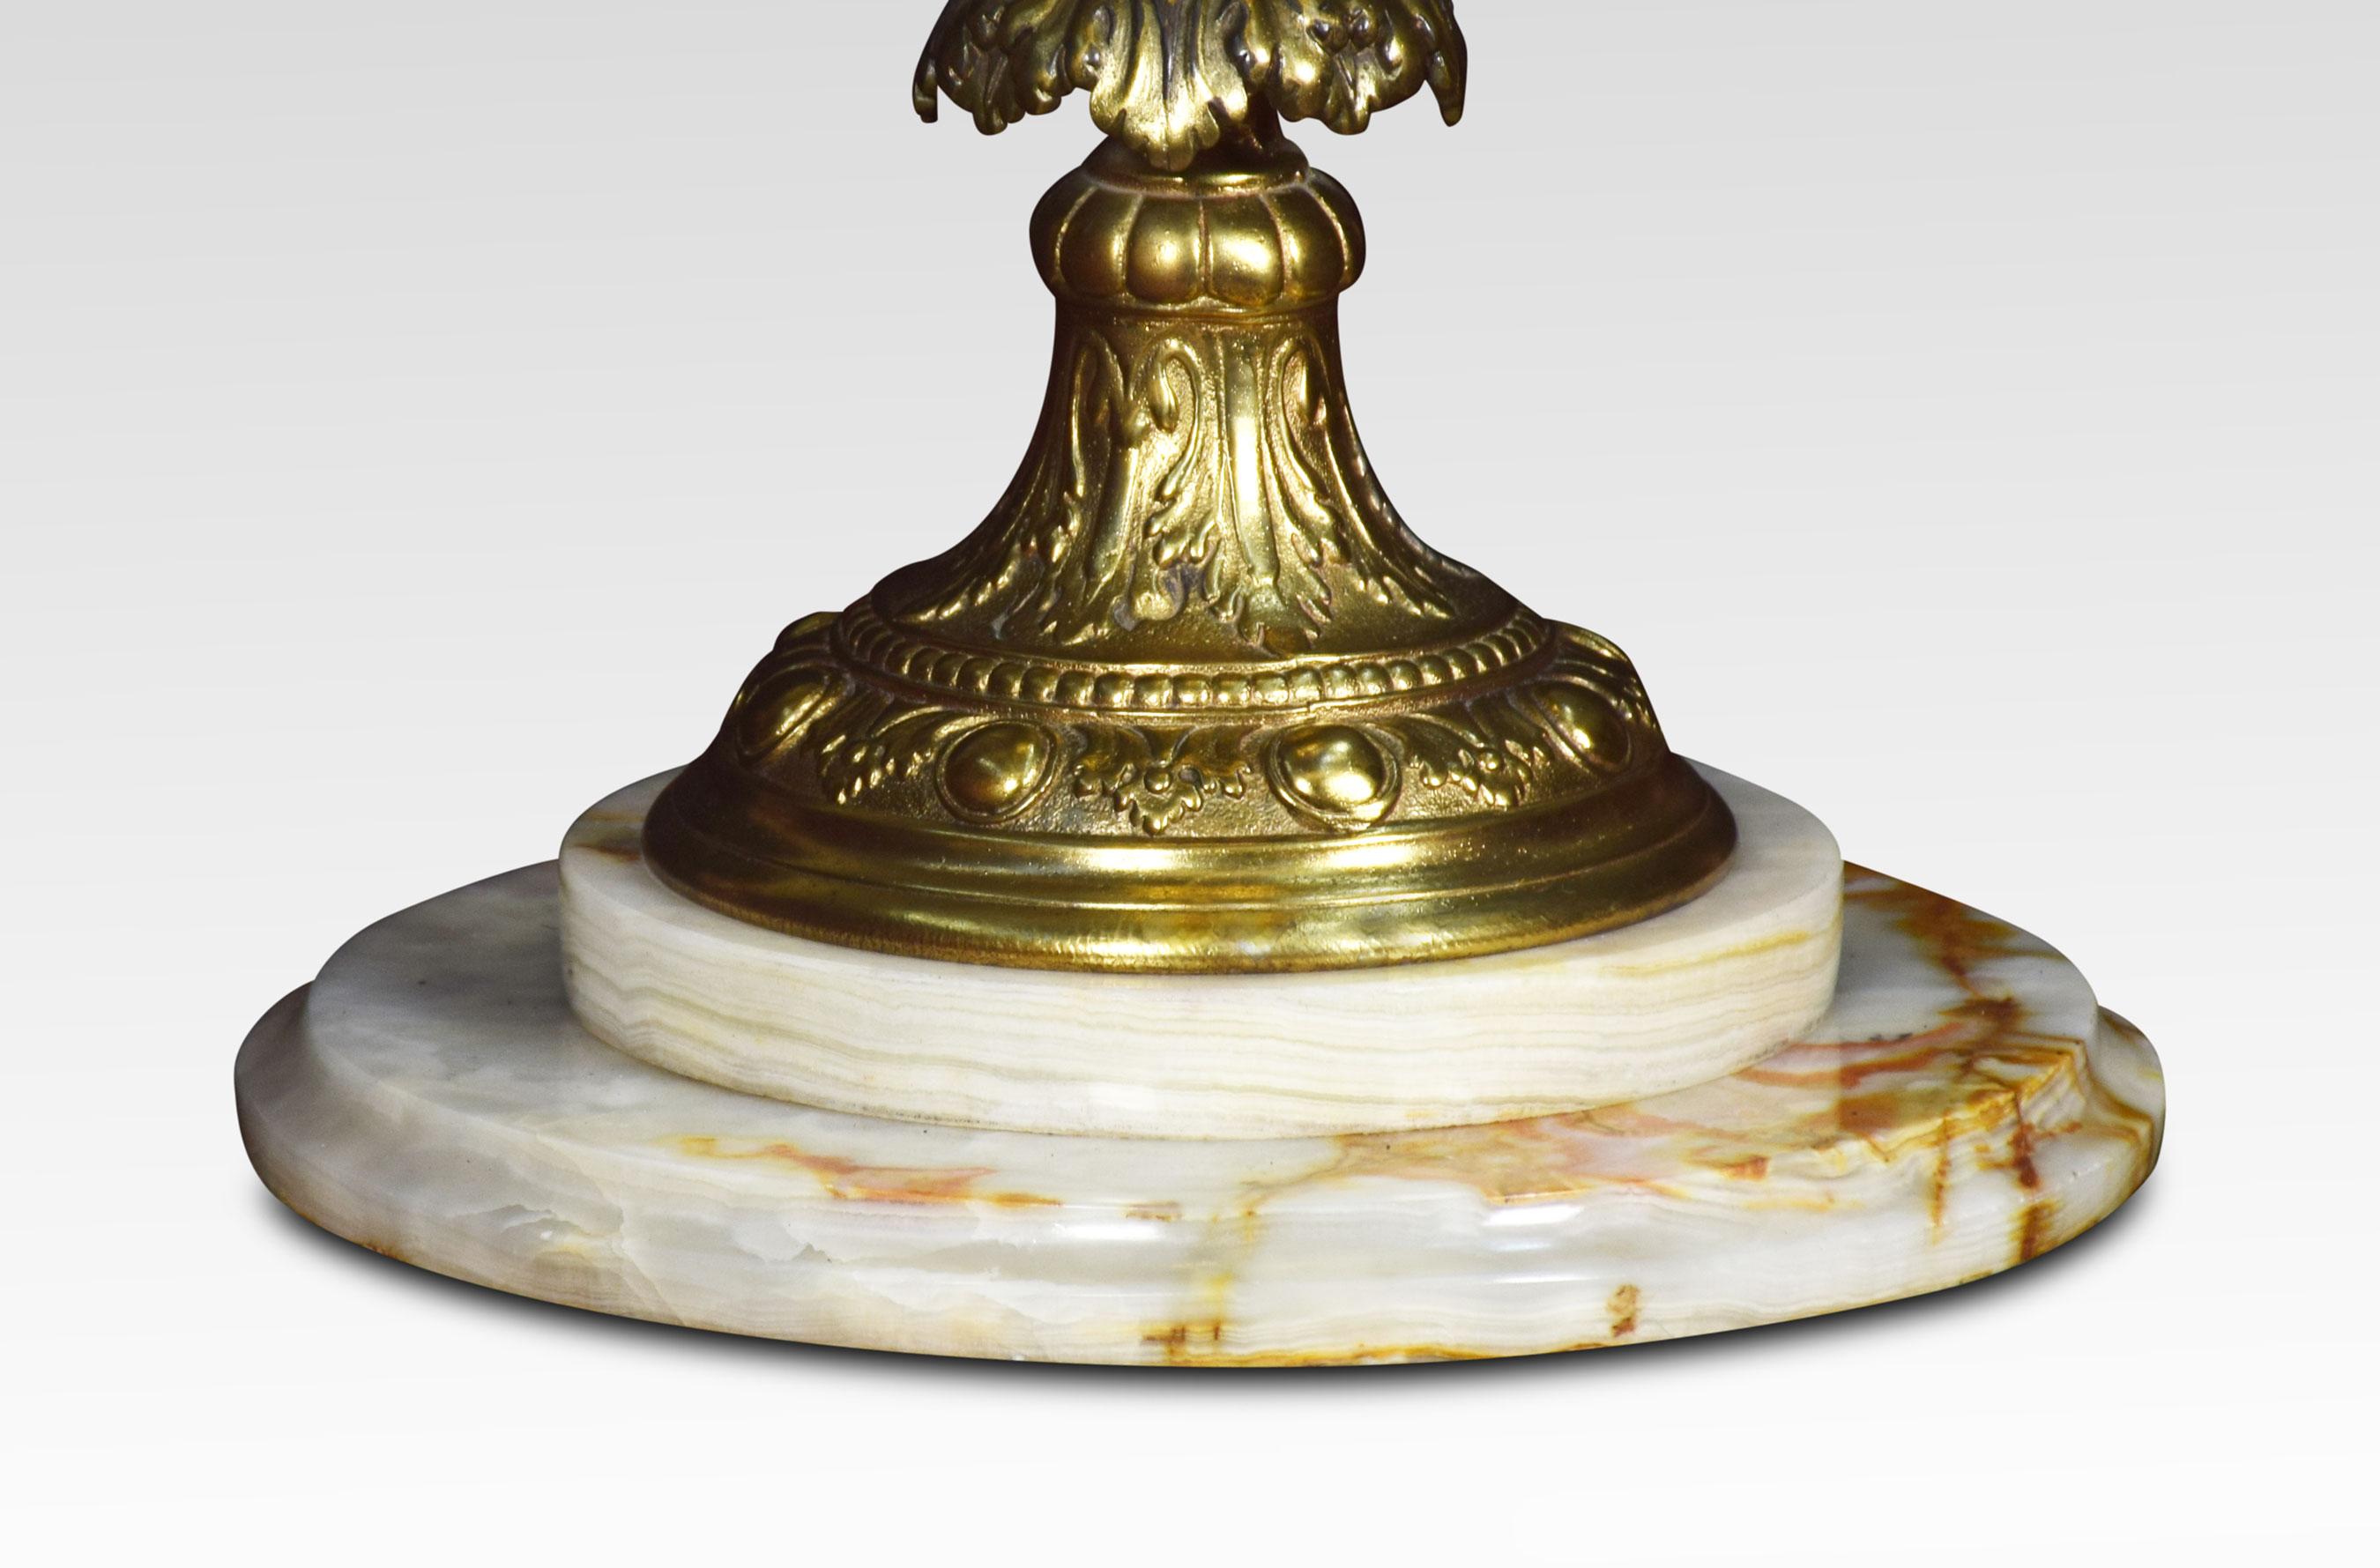 Gilt metal Medici urn table lamp the large ewer with dragon-headed foliated scrolling handle raised up on a marble base.
Dimensions:
Height 33.5 inches
Width 10.5 inches
Depth 10.5 inches.